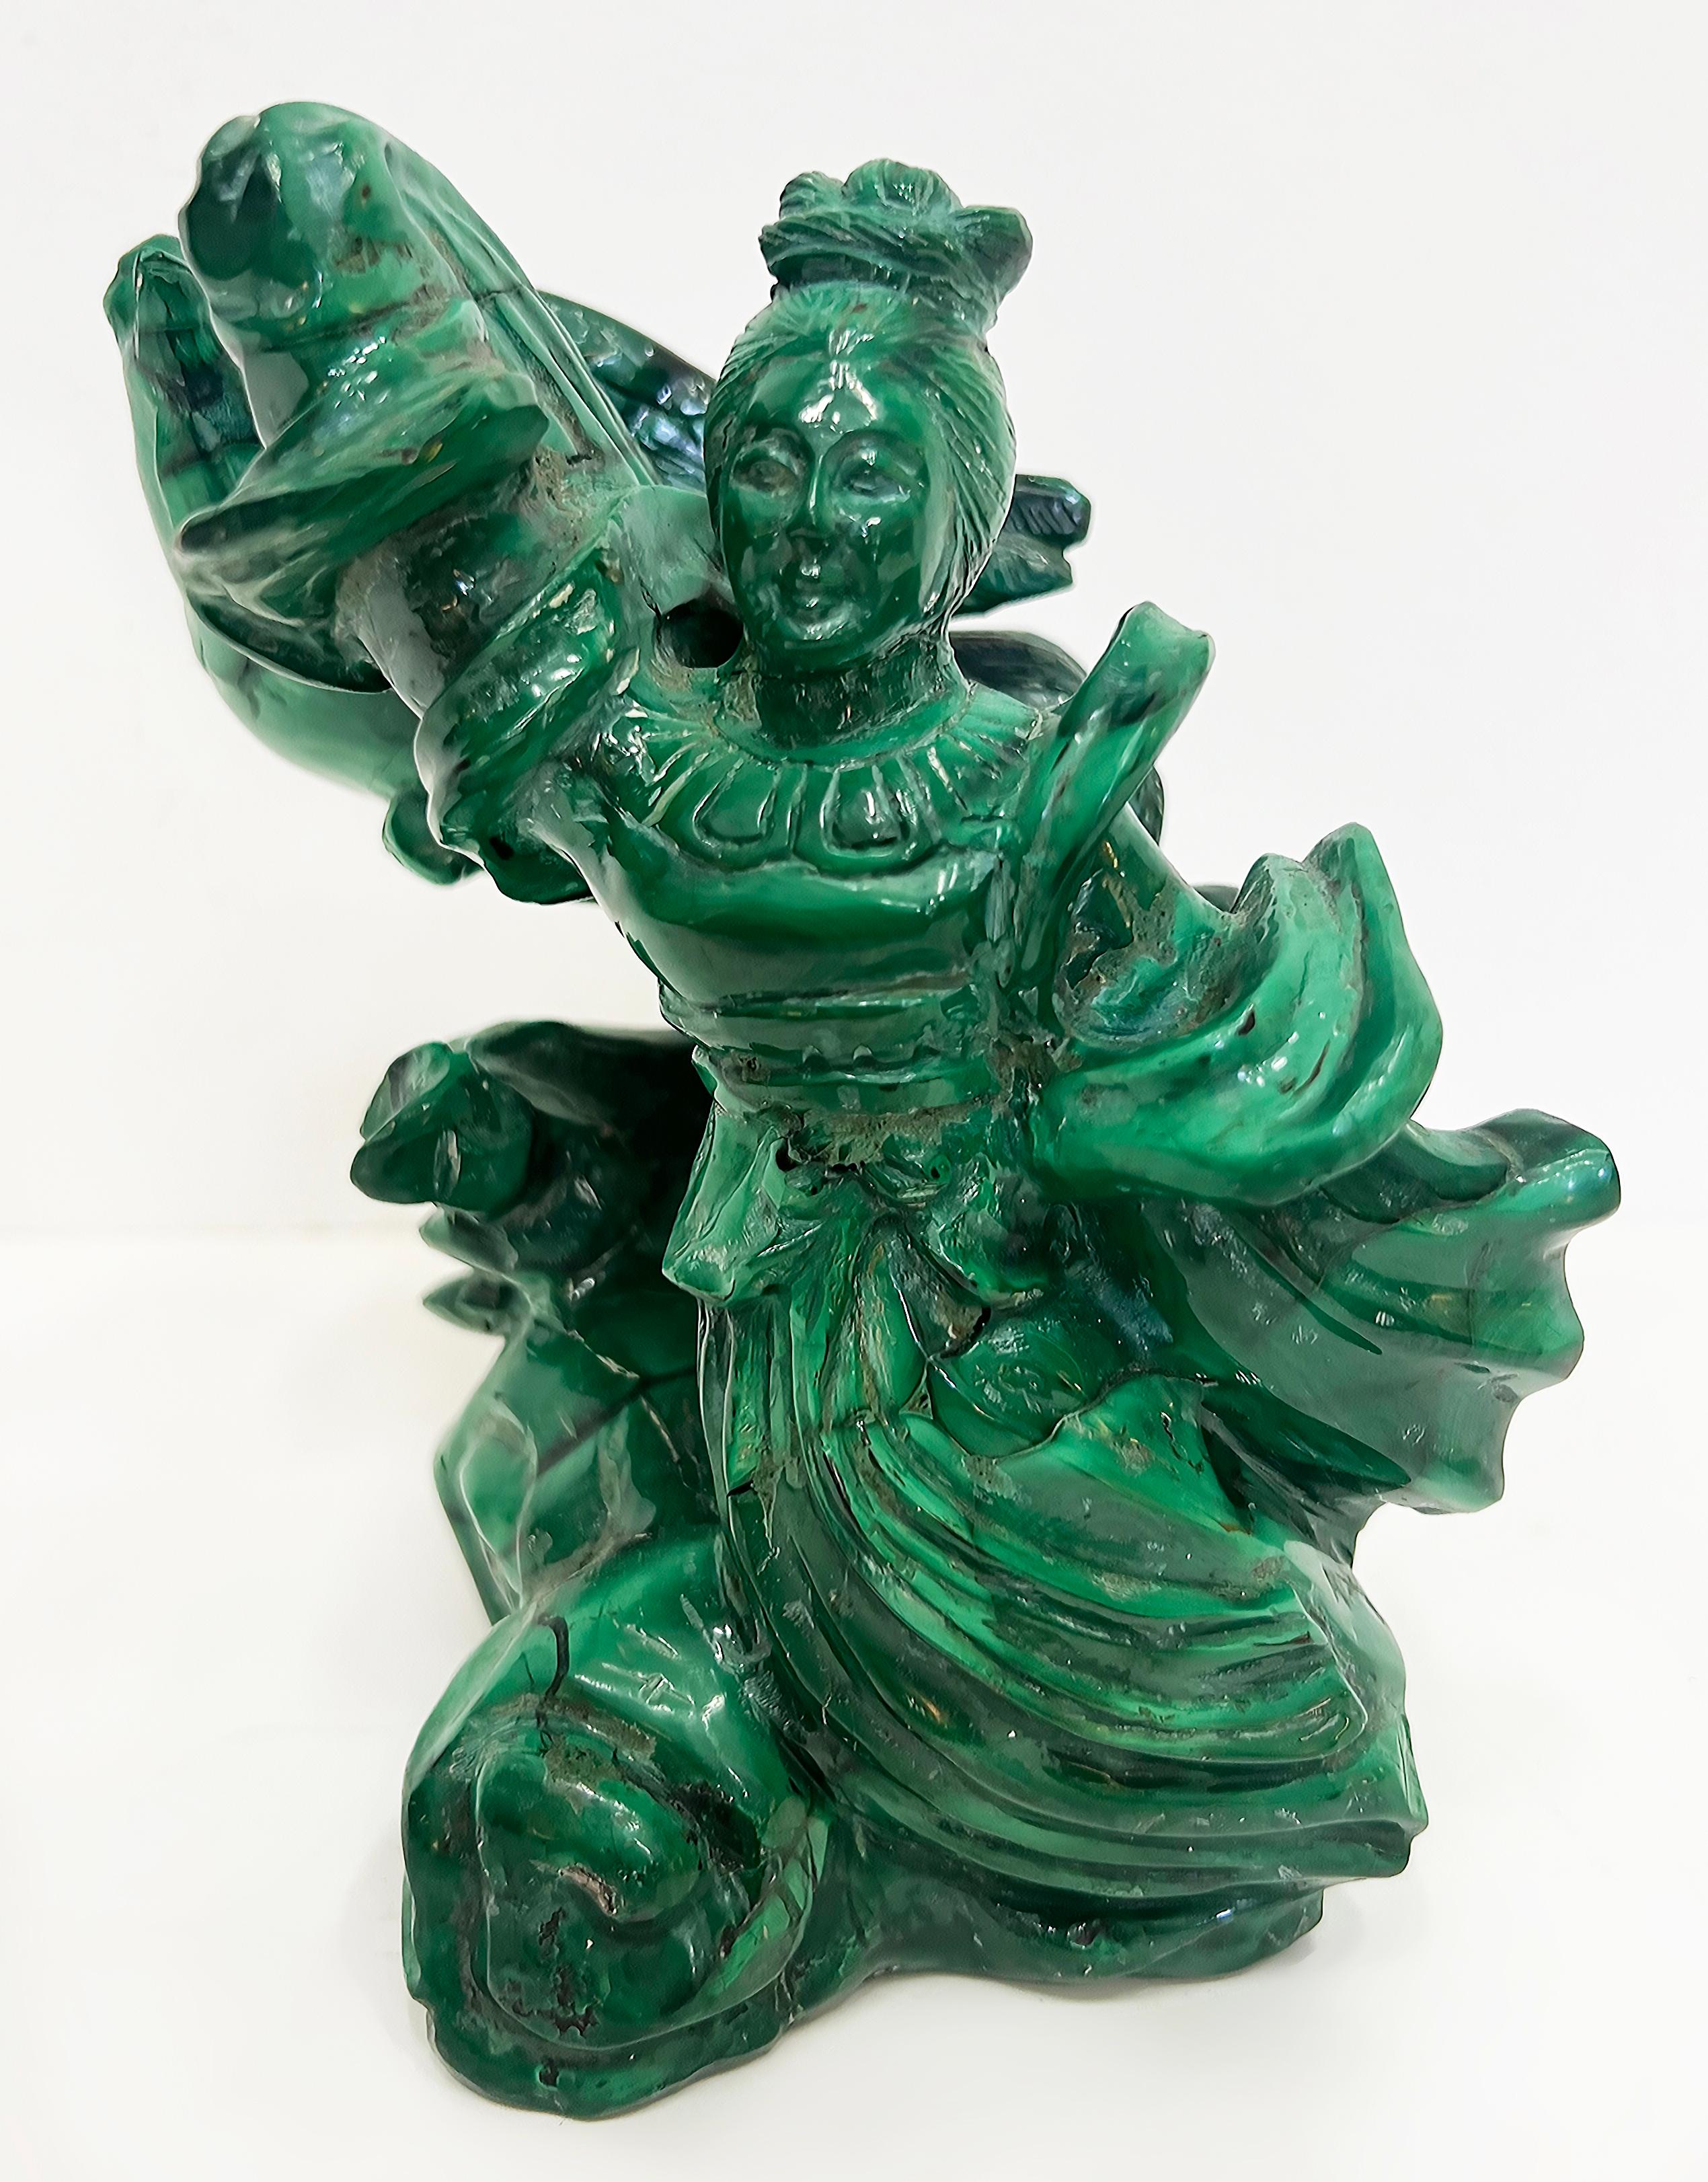 Vintage Chinese Carved Malachite Guan Yin Statue, Phoenix Bird 

Offered for sale is a Chinese hand-carved malachite figure of a Guan Yin surrounded by the wings of a Phoenix bid that is behind her. This statue is a larger size than most. In Chinese